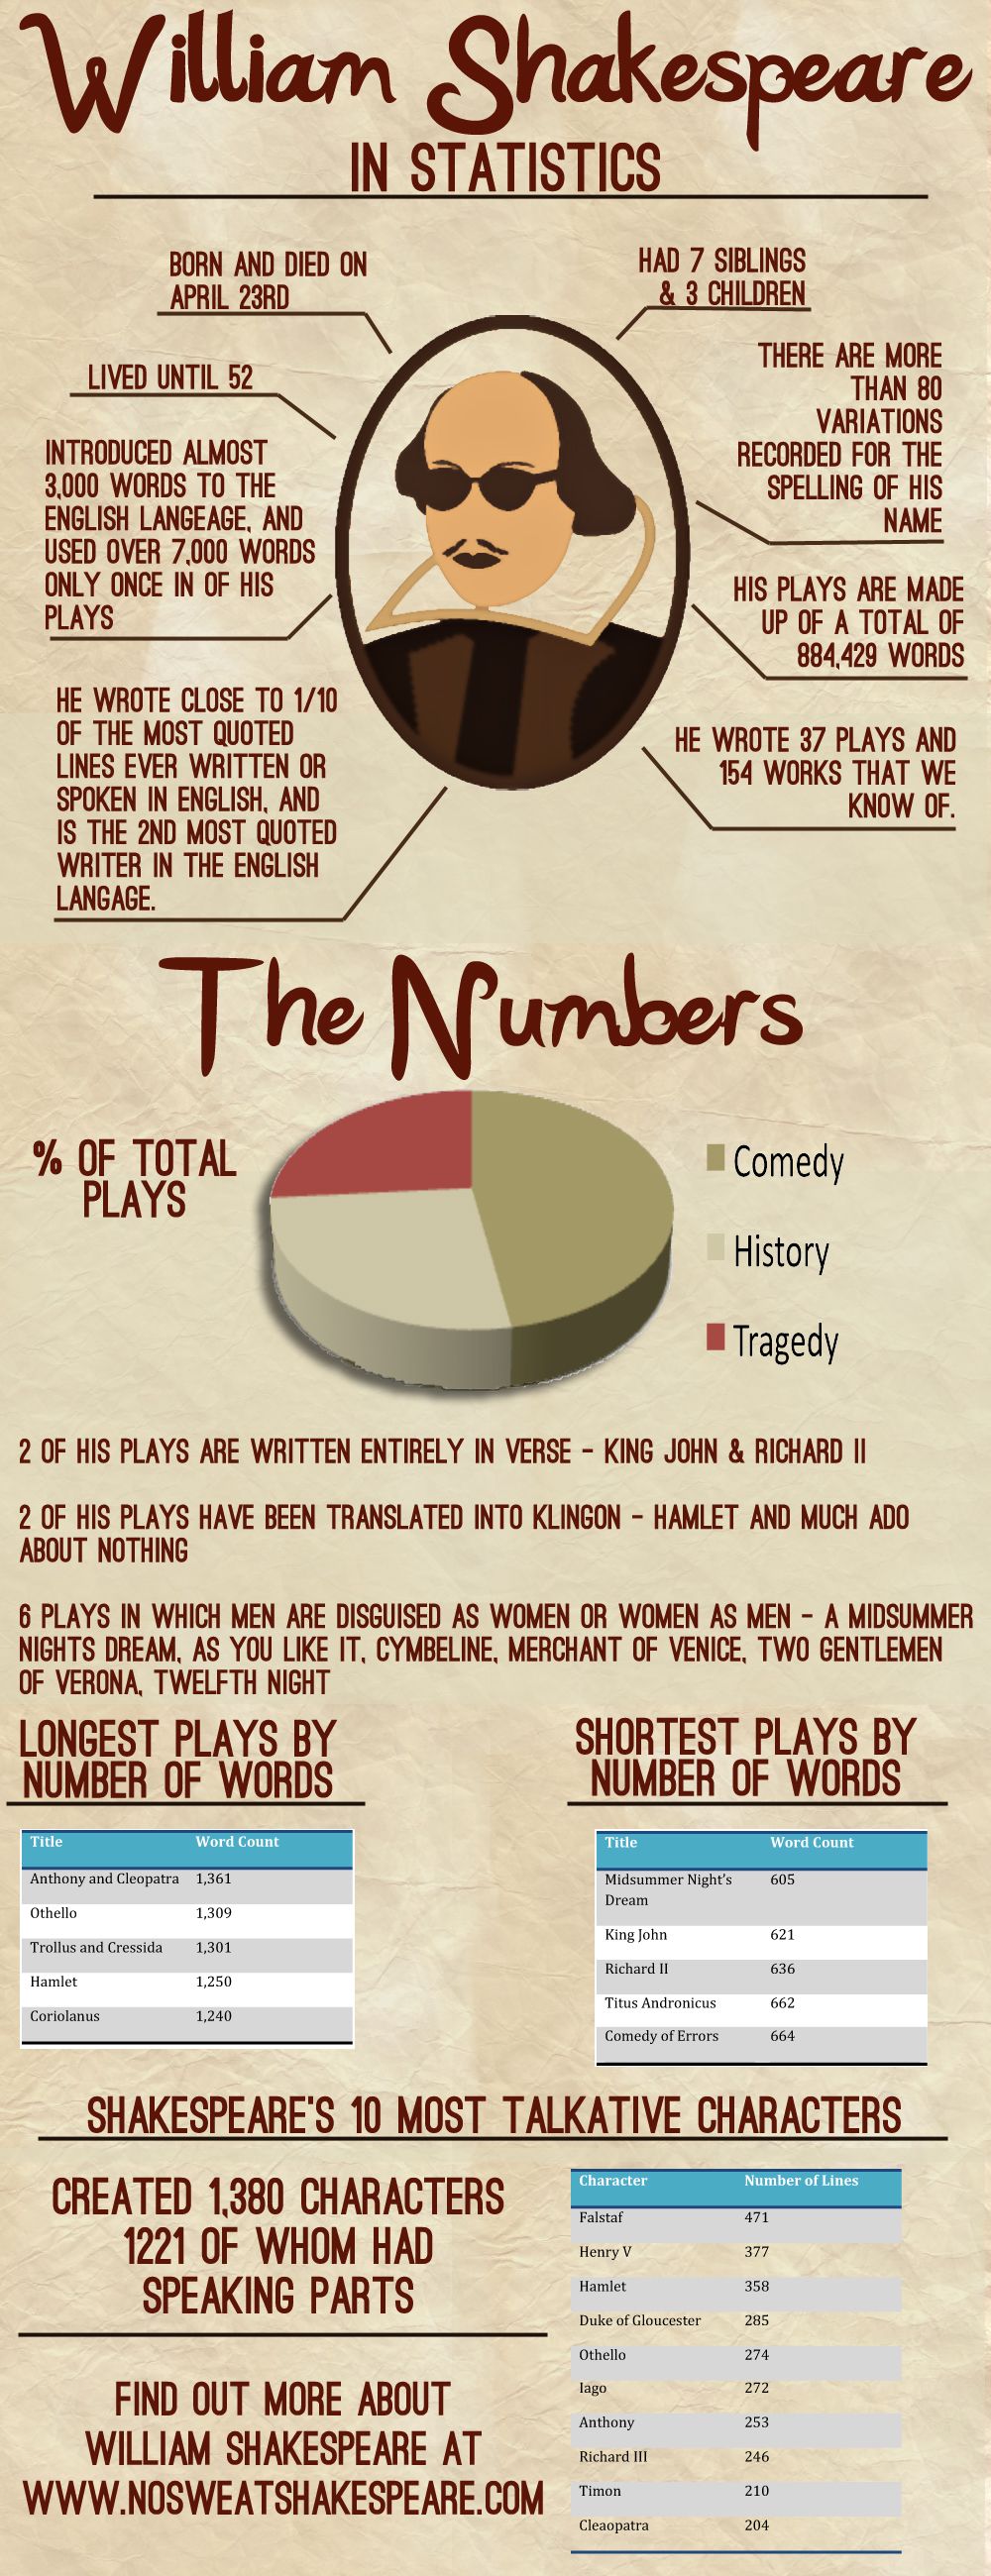 Shakespeare In Statistics: The Infographic